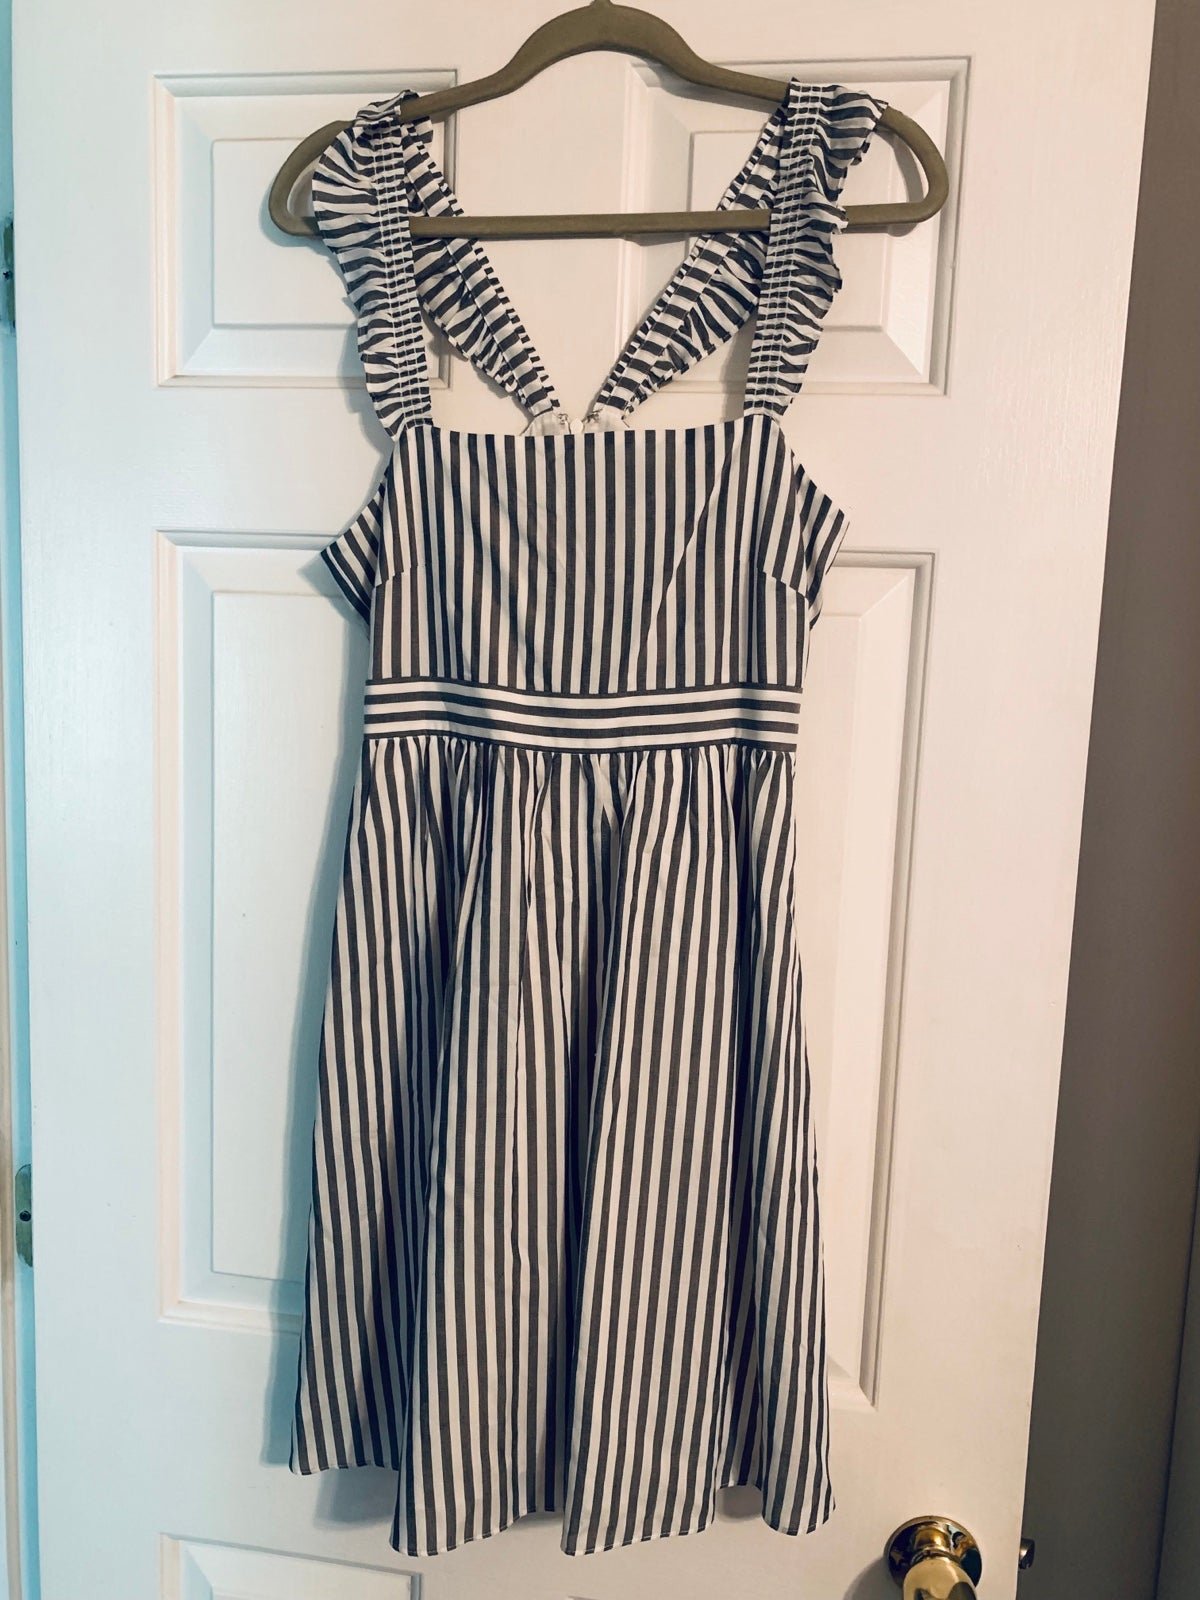 high discount Ladies Madewell Striped Ruffle-Strap Empire Dress Lined Gray White Size 4 ftV9PDShY Buying Cheap